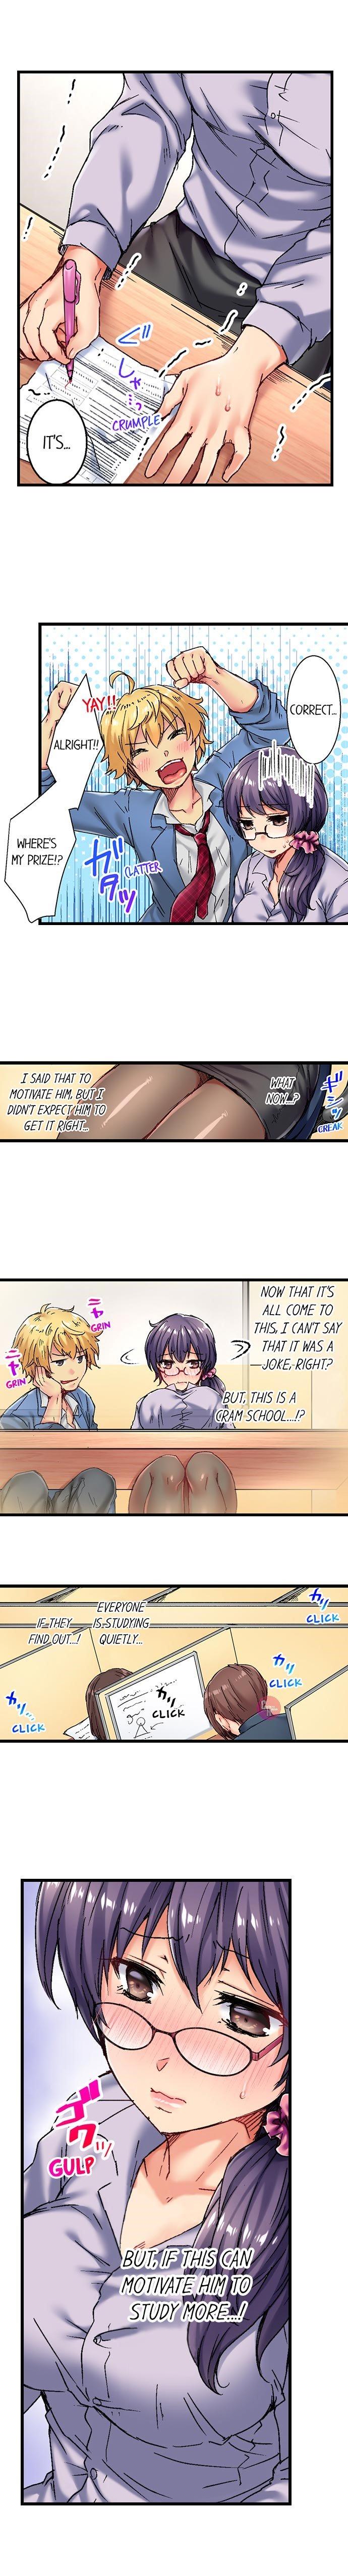 Yoga Rewarding My Student with Sex Ch.6/? Gay Bus - Page 13